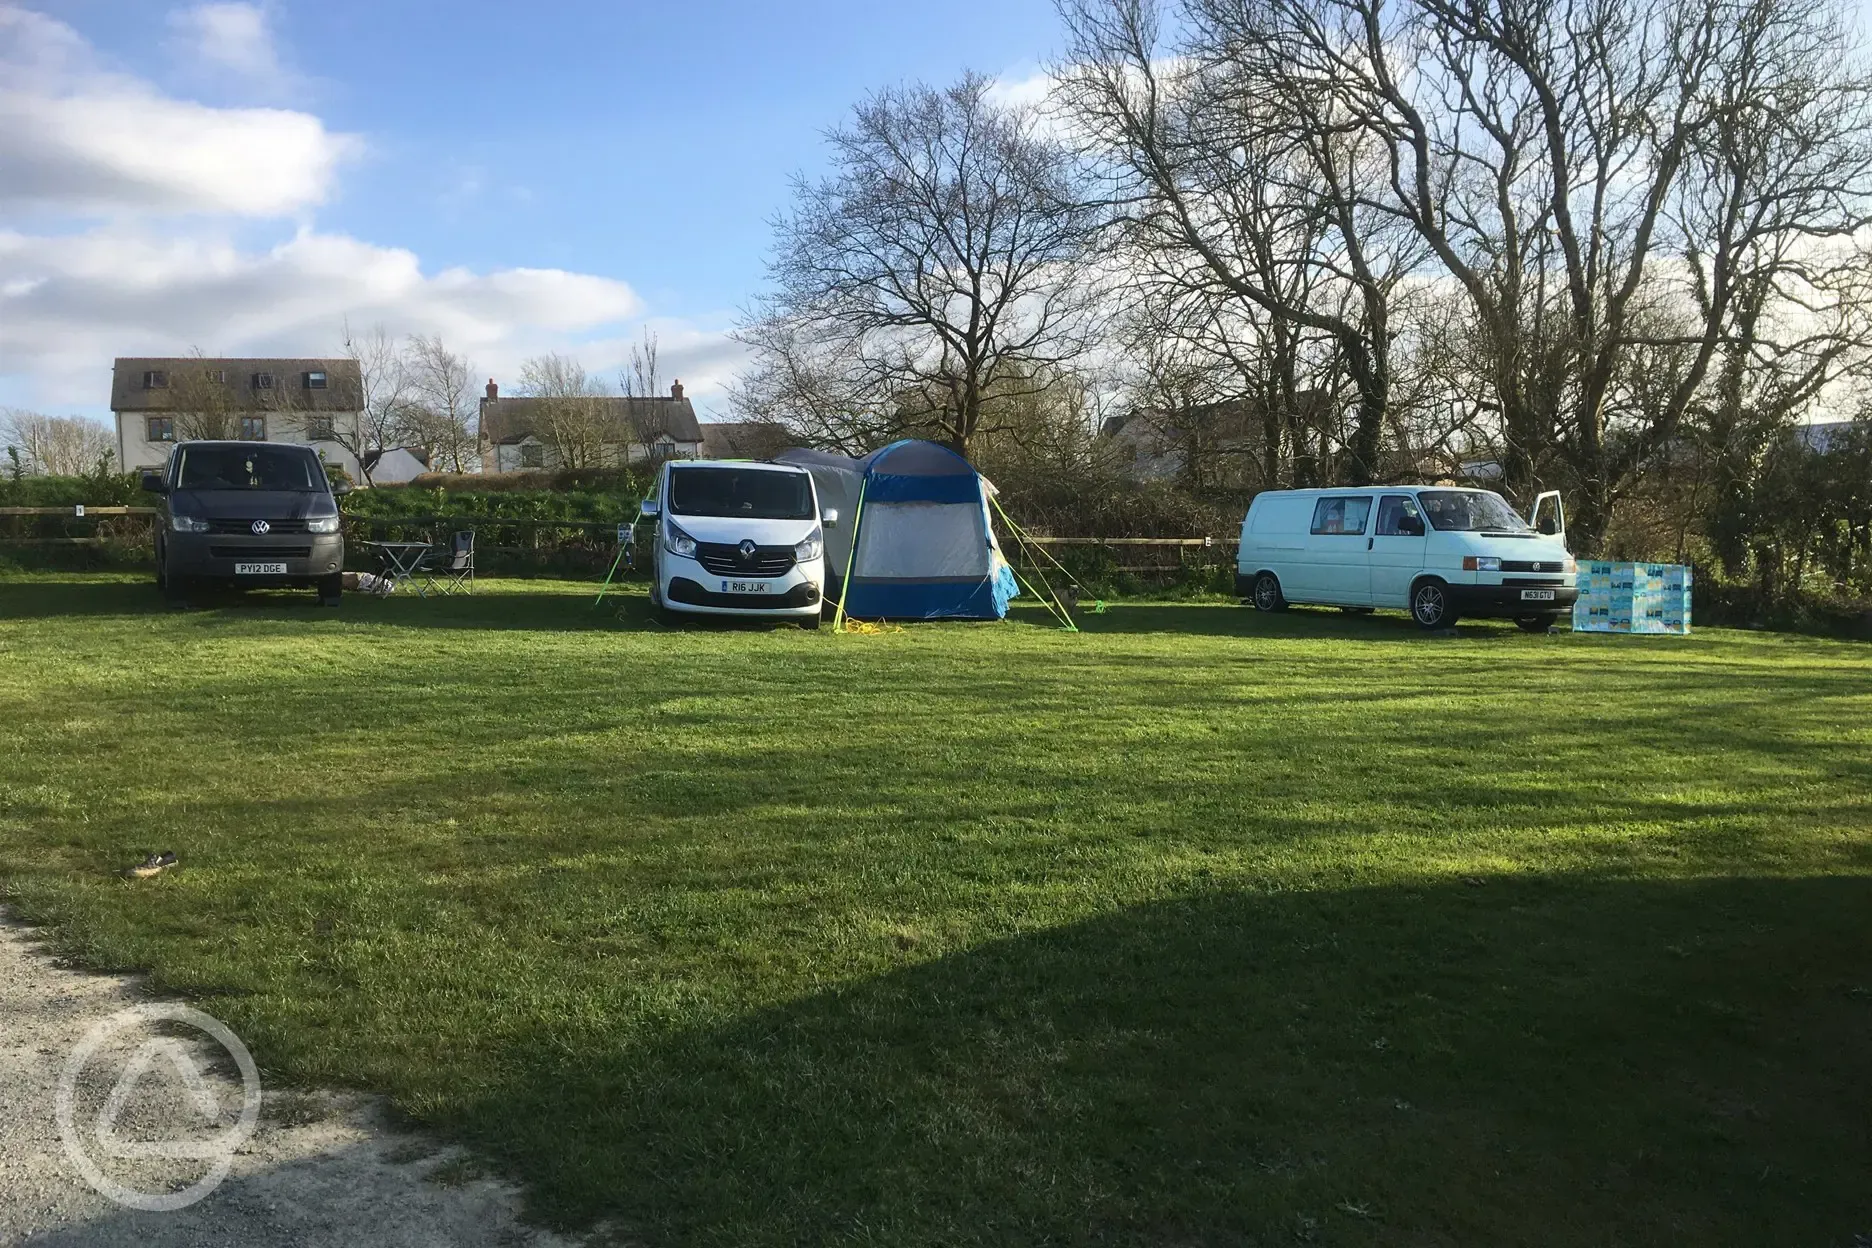 Panoramic pitches for small campervans and tents. EHU optional